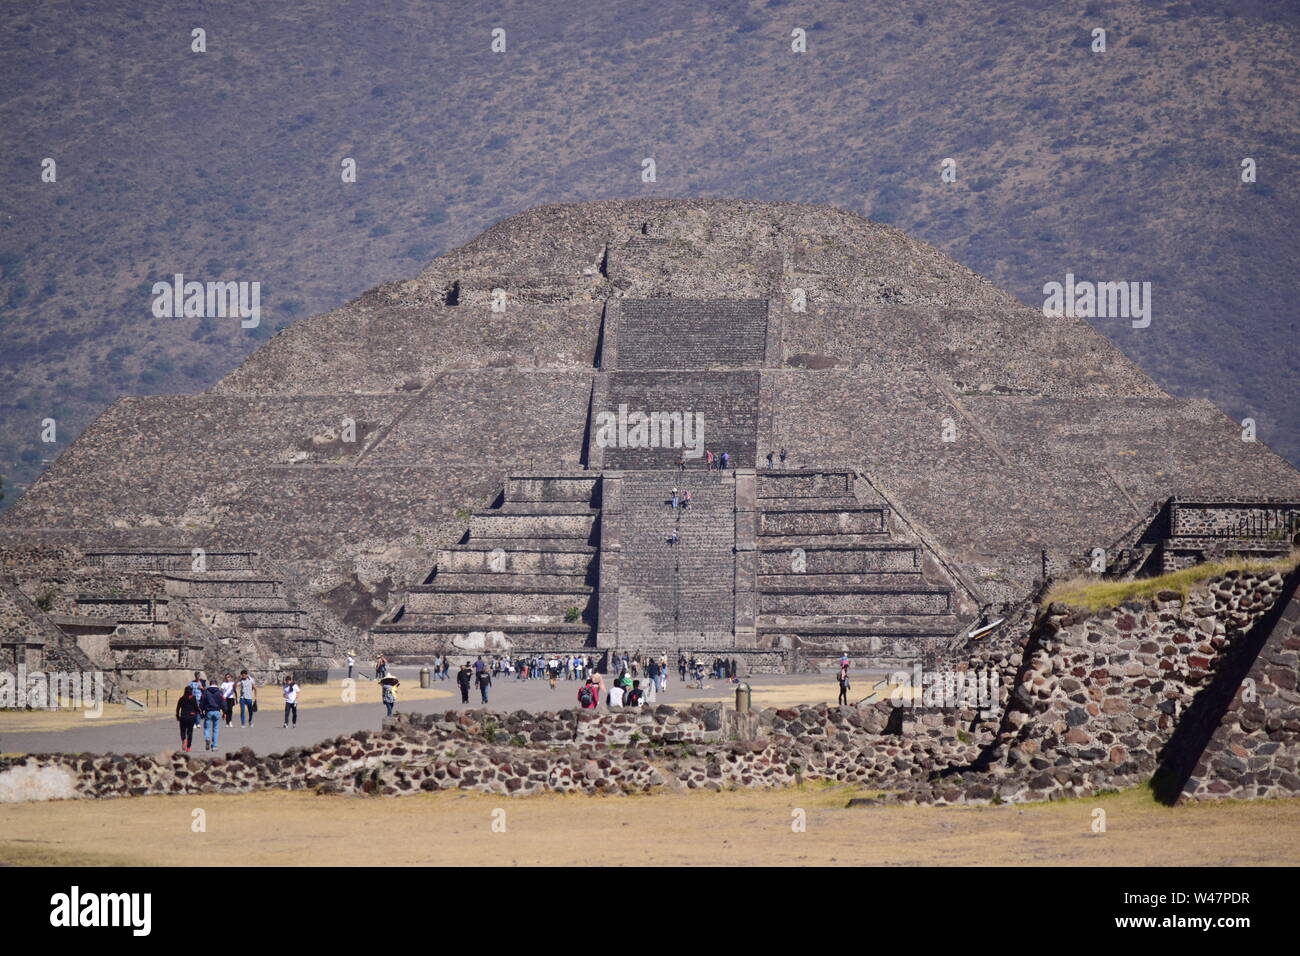 View of the largest structure in San Juan Teotihuacan, Pyramid of the Sun. Stock Photo